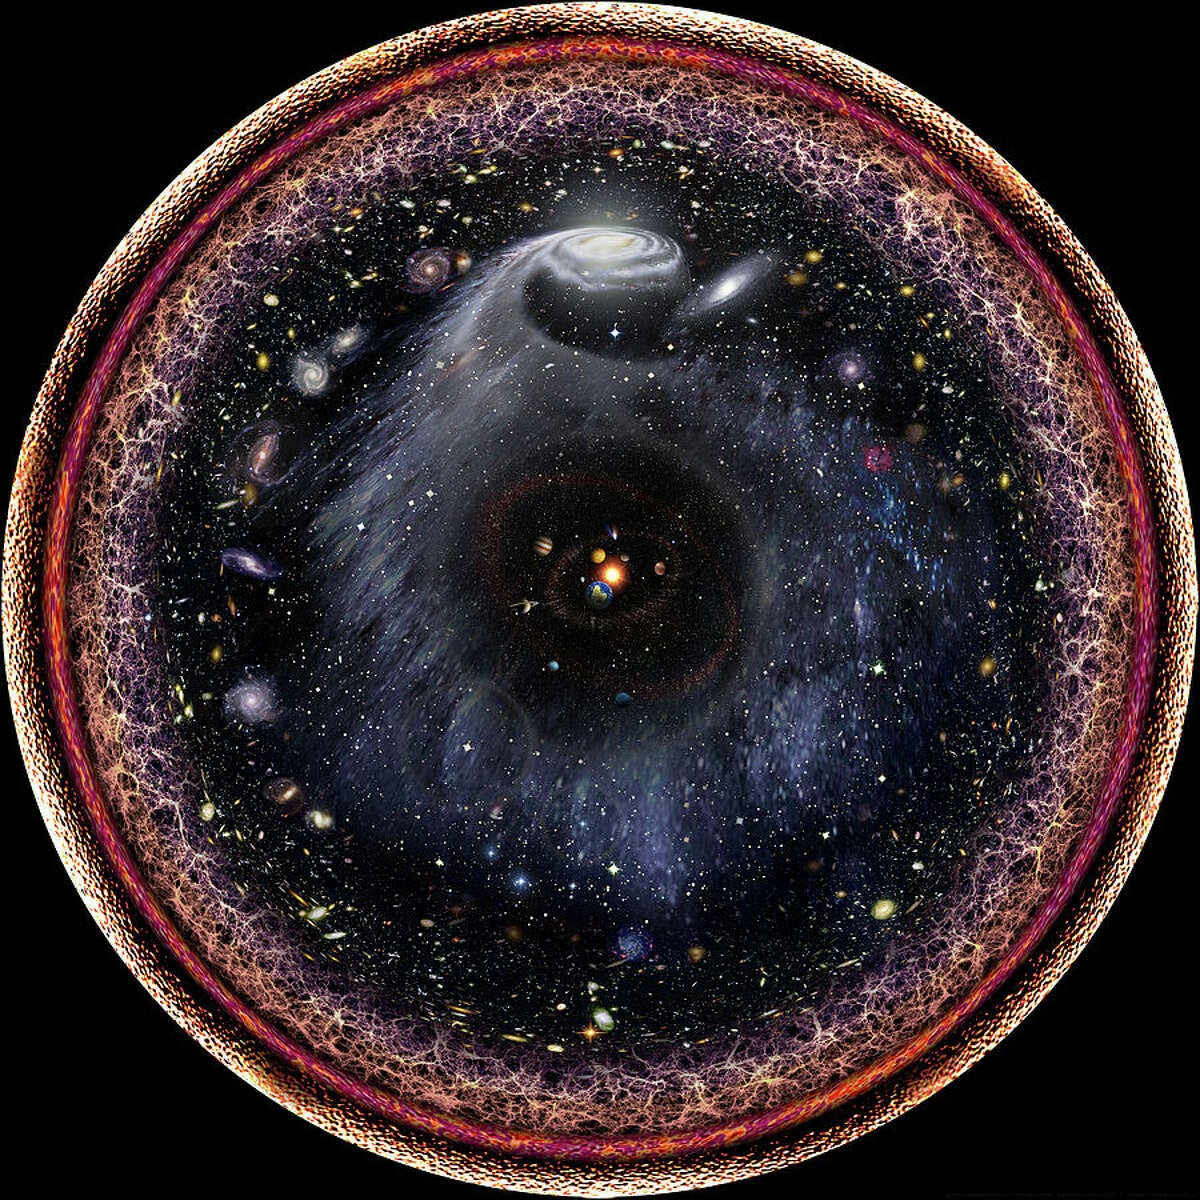 See the entire universe captured in just one image